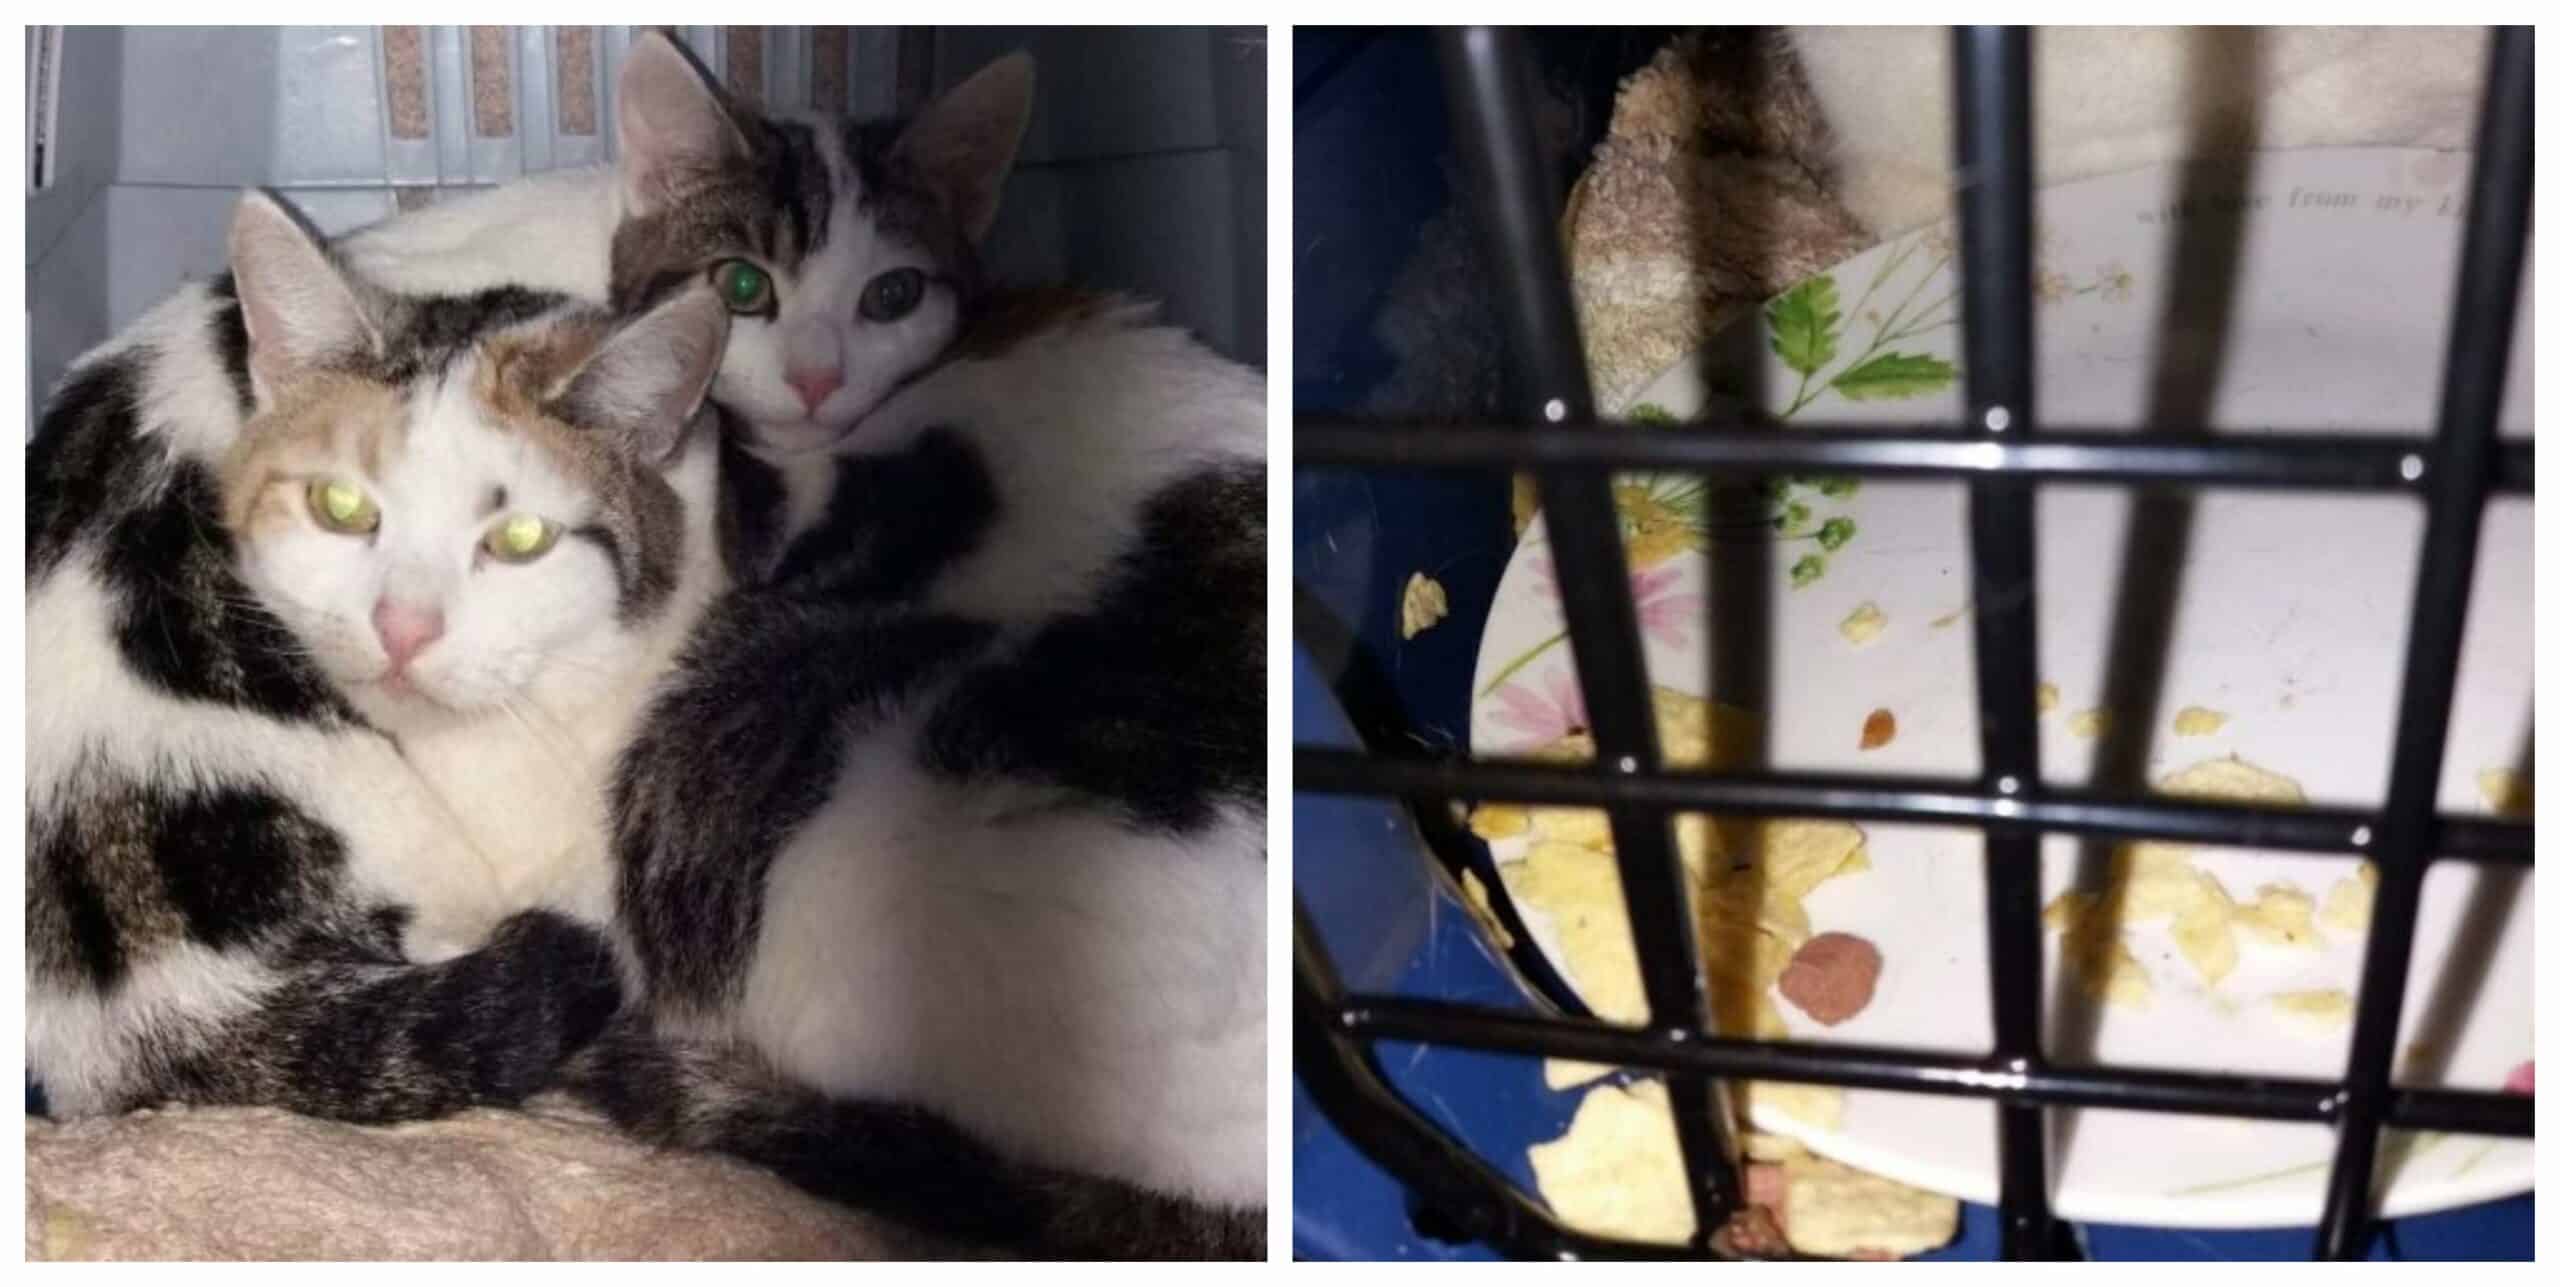 On a woman's doorstep a mother cat and her kitten were left with some potato chips